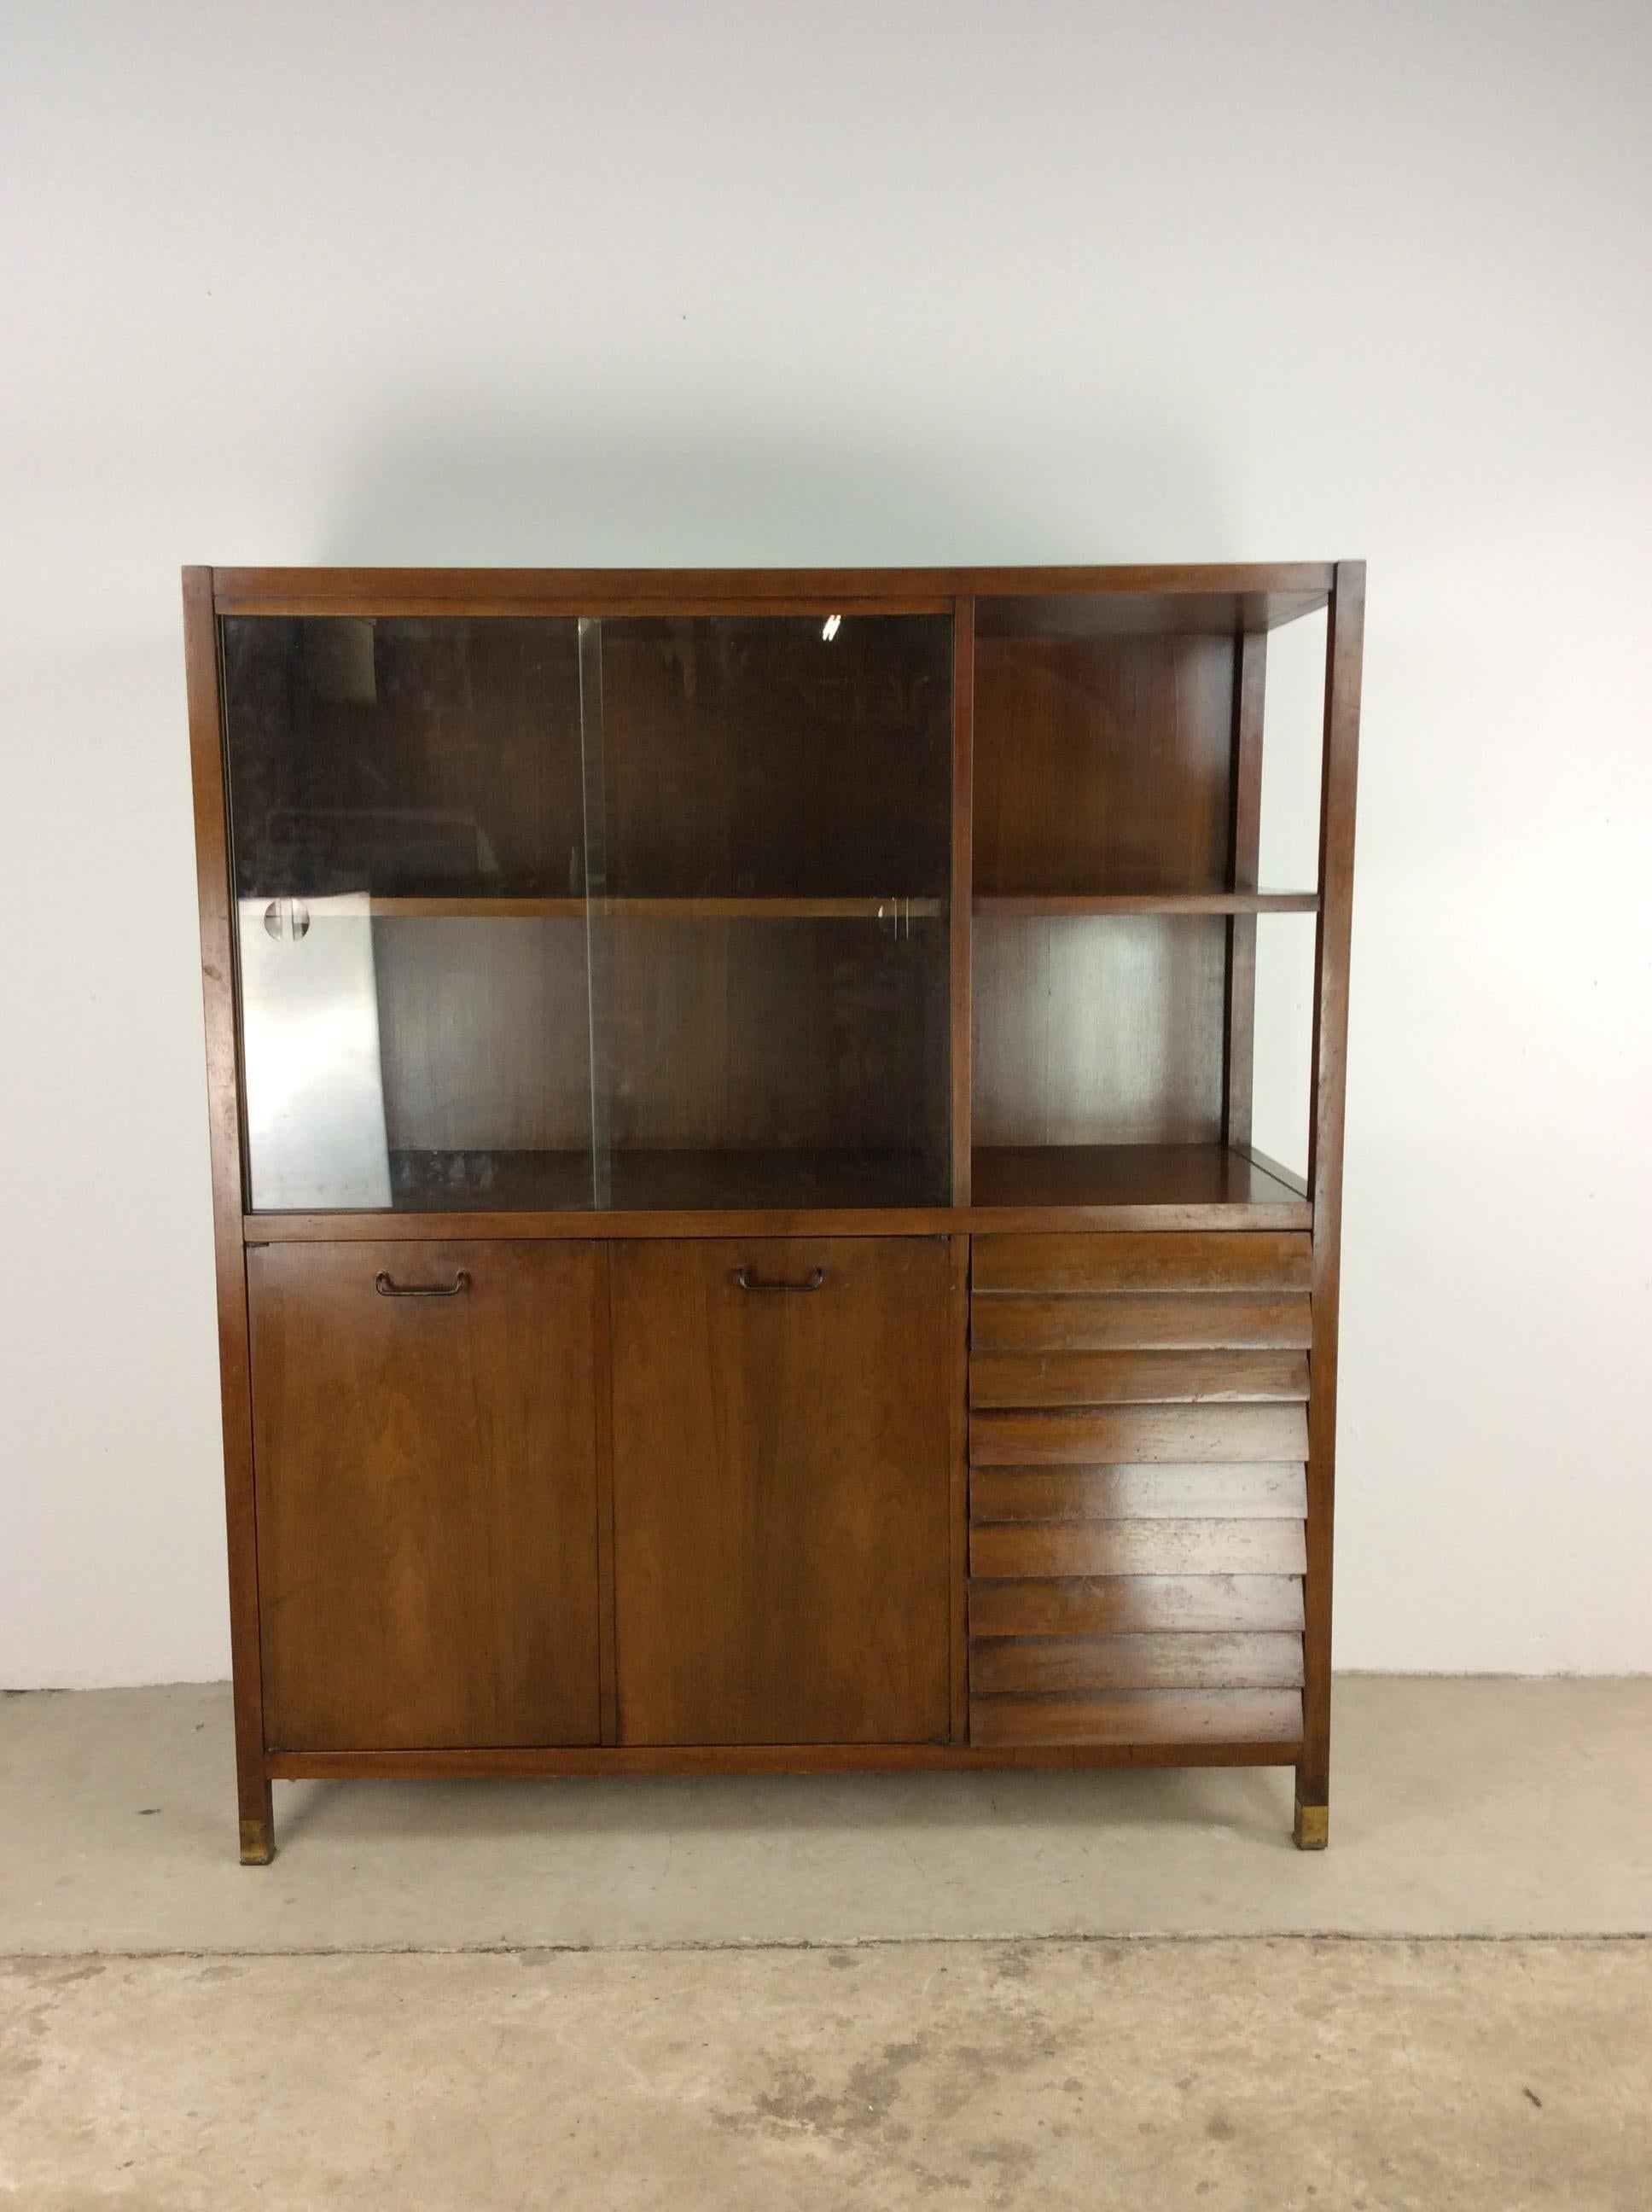 This Mid-Century Modern china cabinet / server from the Dania line by American of Martinsville features hardwood construction, walnut veneer with original finish, three dovetailed drawers with louvered fronts, static shelving behind sliding glass